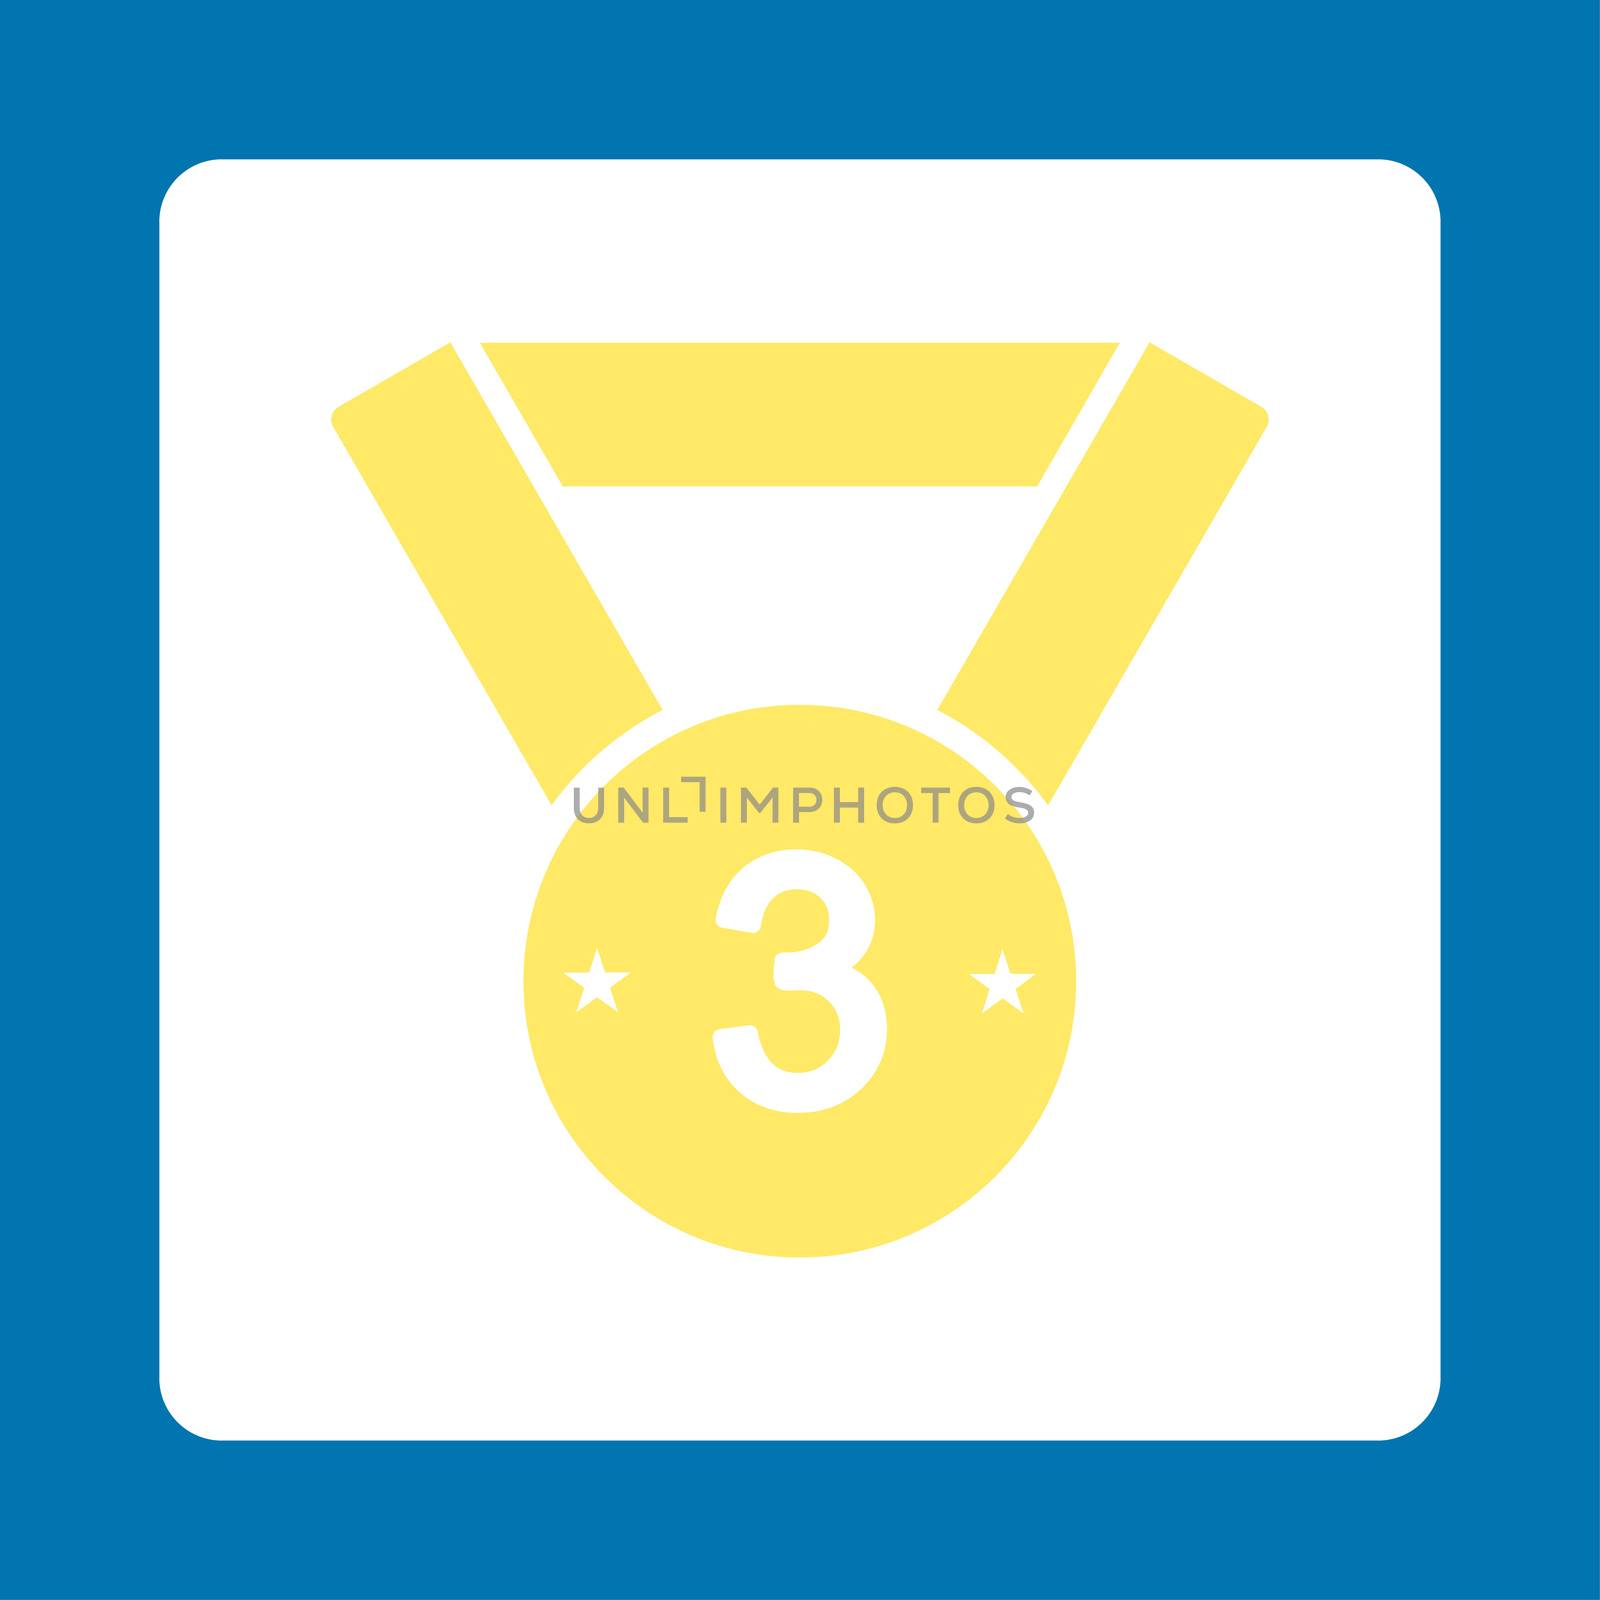 Third medal icon from Award Buttons OverColor Set. Icon style is yellow and white colors, flat rounded square button, blue background.